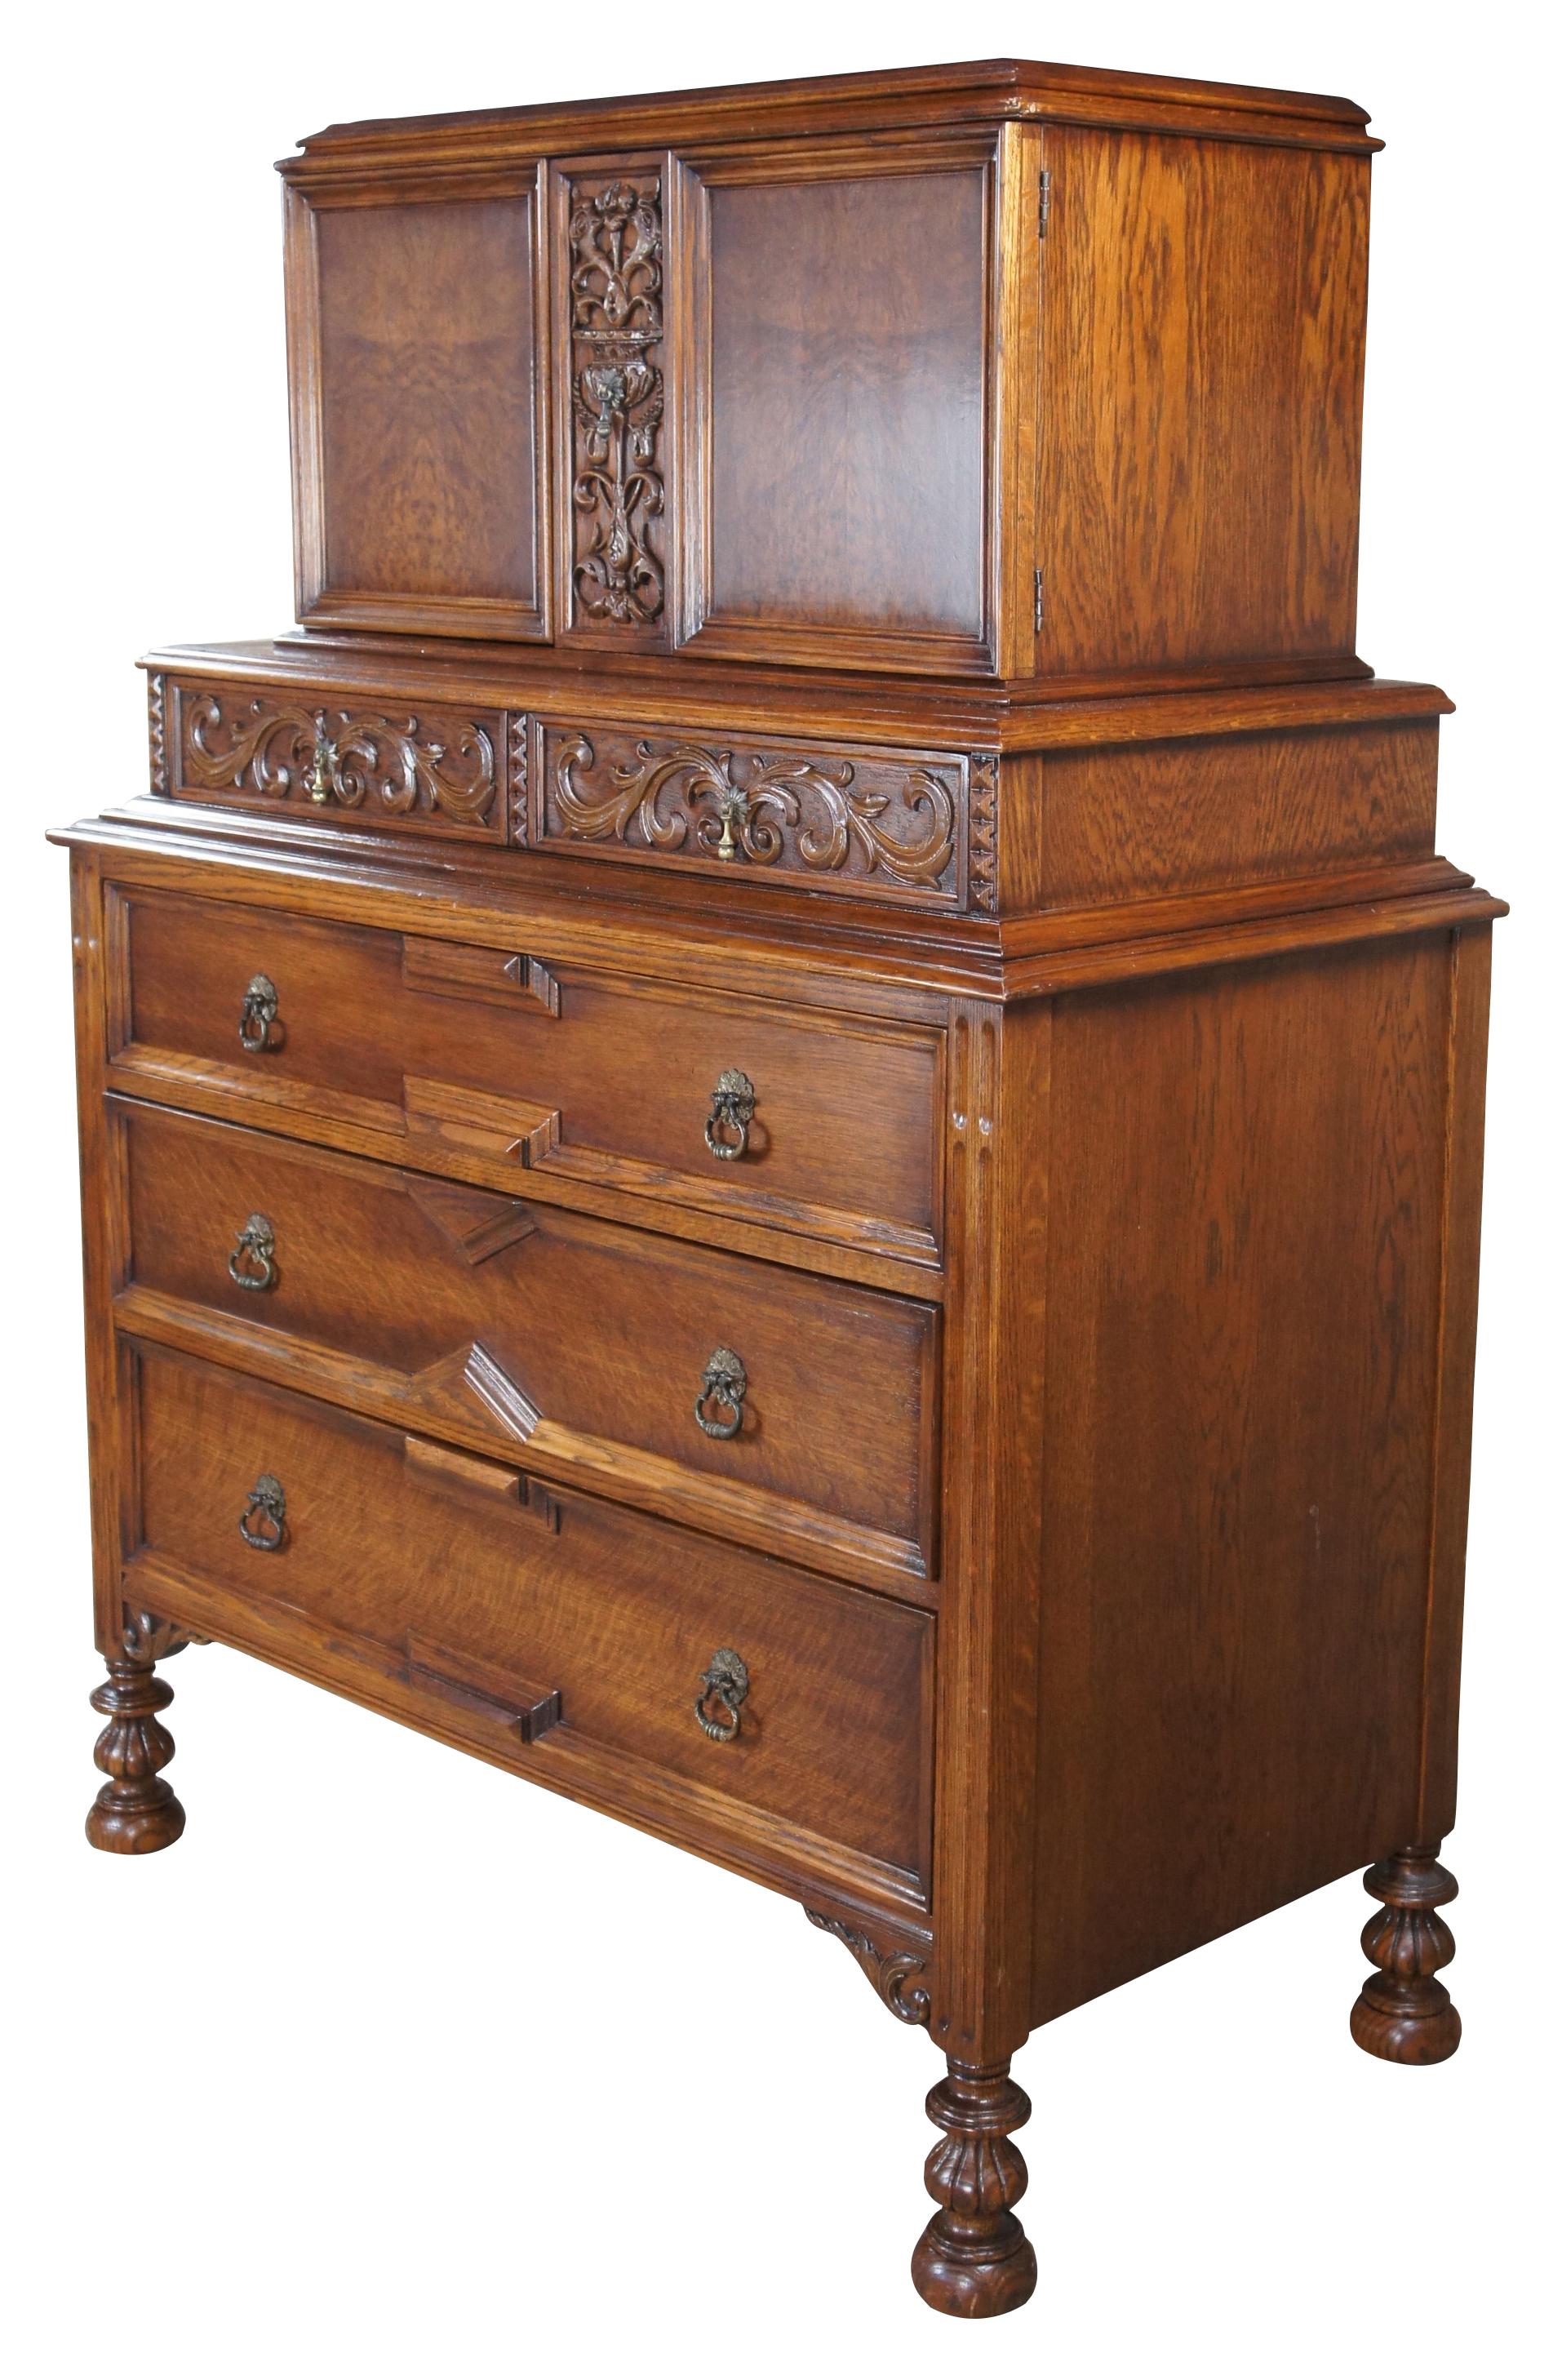 American Furniture Company Gothic or Spanish Renaissance Revival tallboy Gentleman's dresser or Chifforobe (chiffarobe or chifferobe), circa 1930s. Operating out of Batesville Indiana since 1899, they worked closely and collaborated in part with